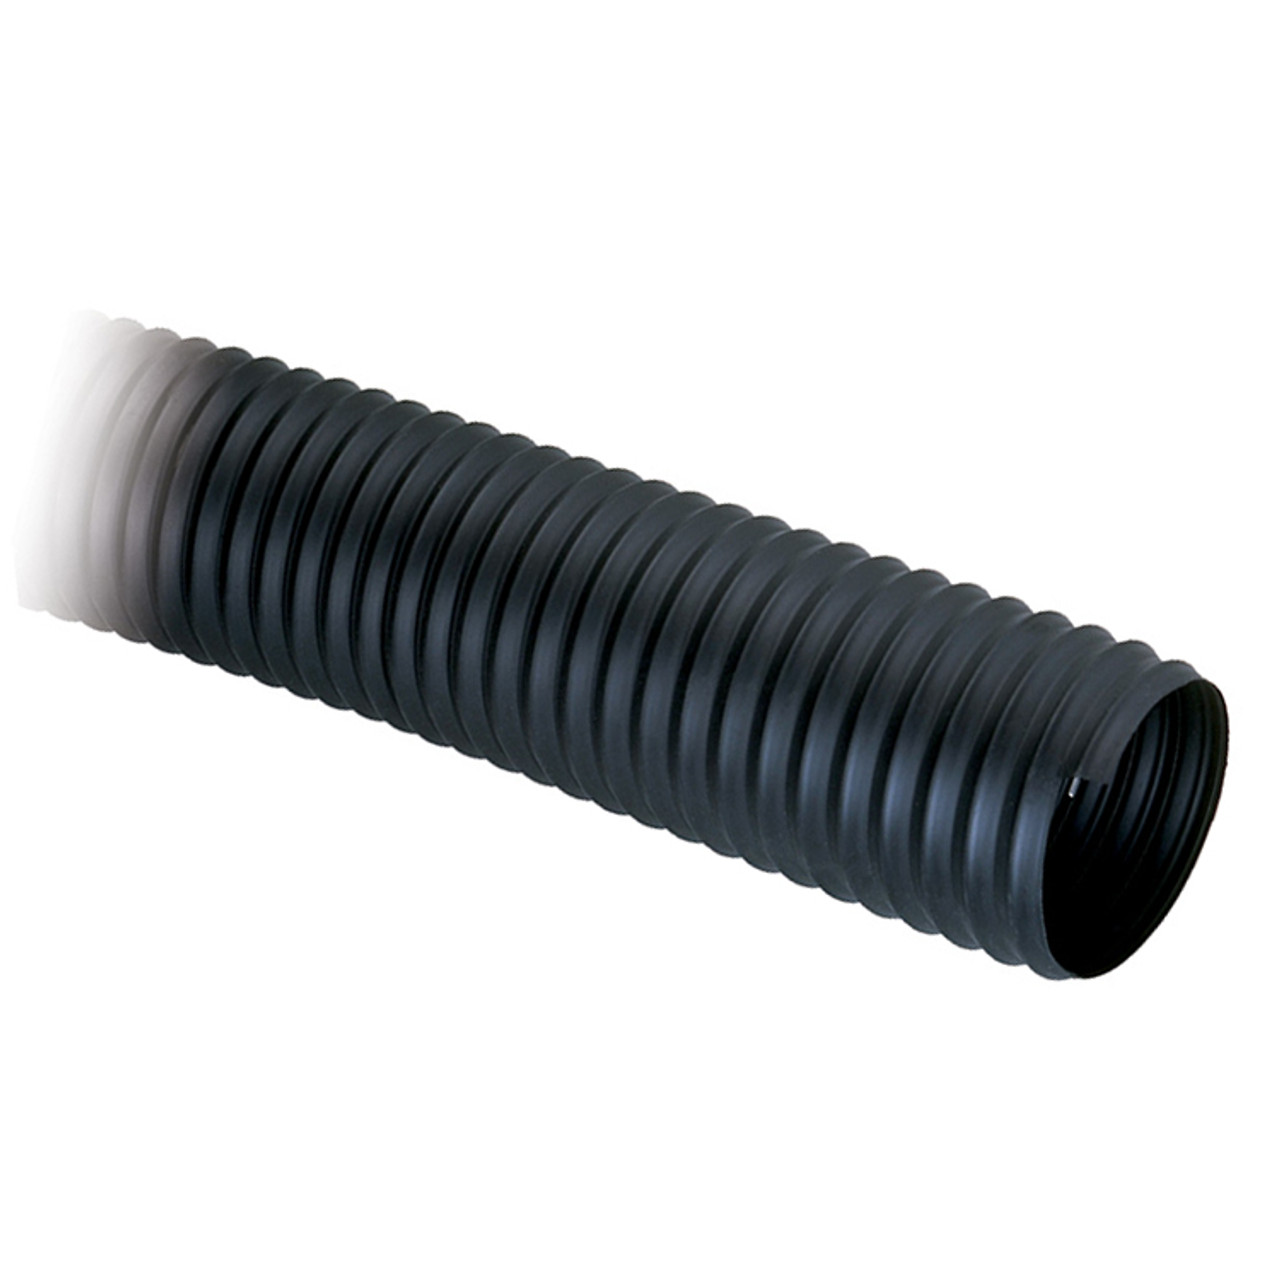 2" Thermoplastic Rubber Ducting Hose   TPR-200